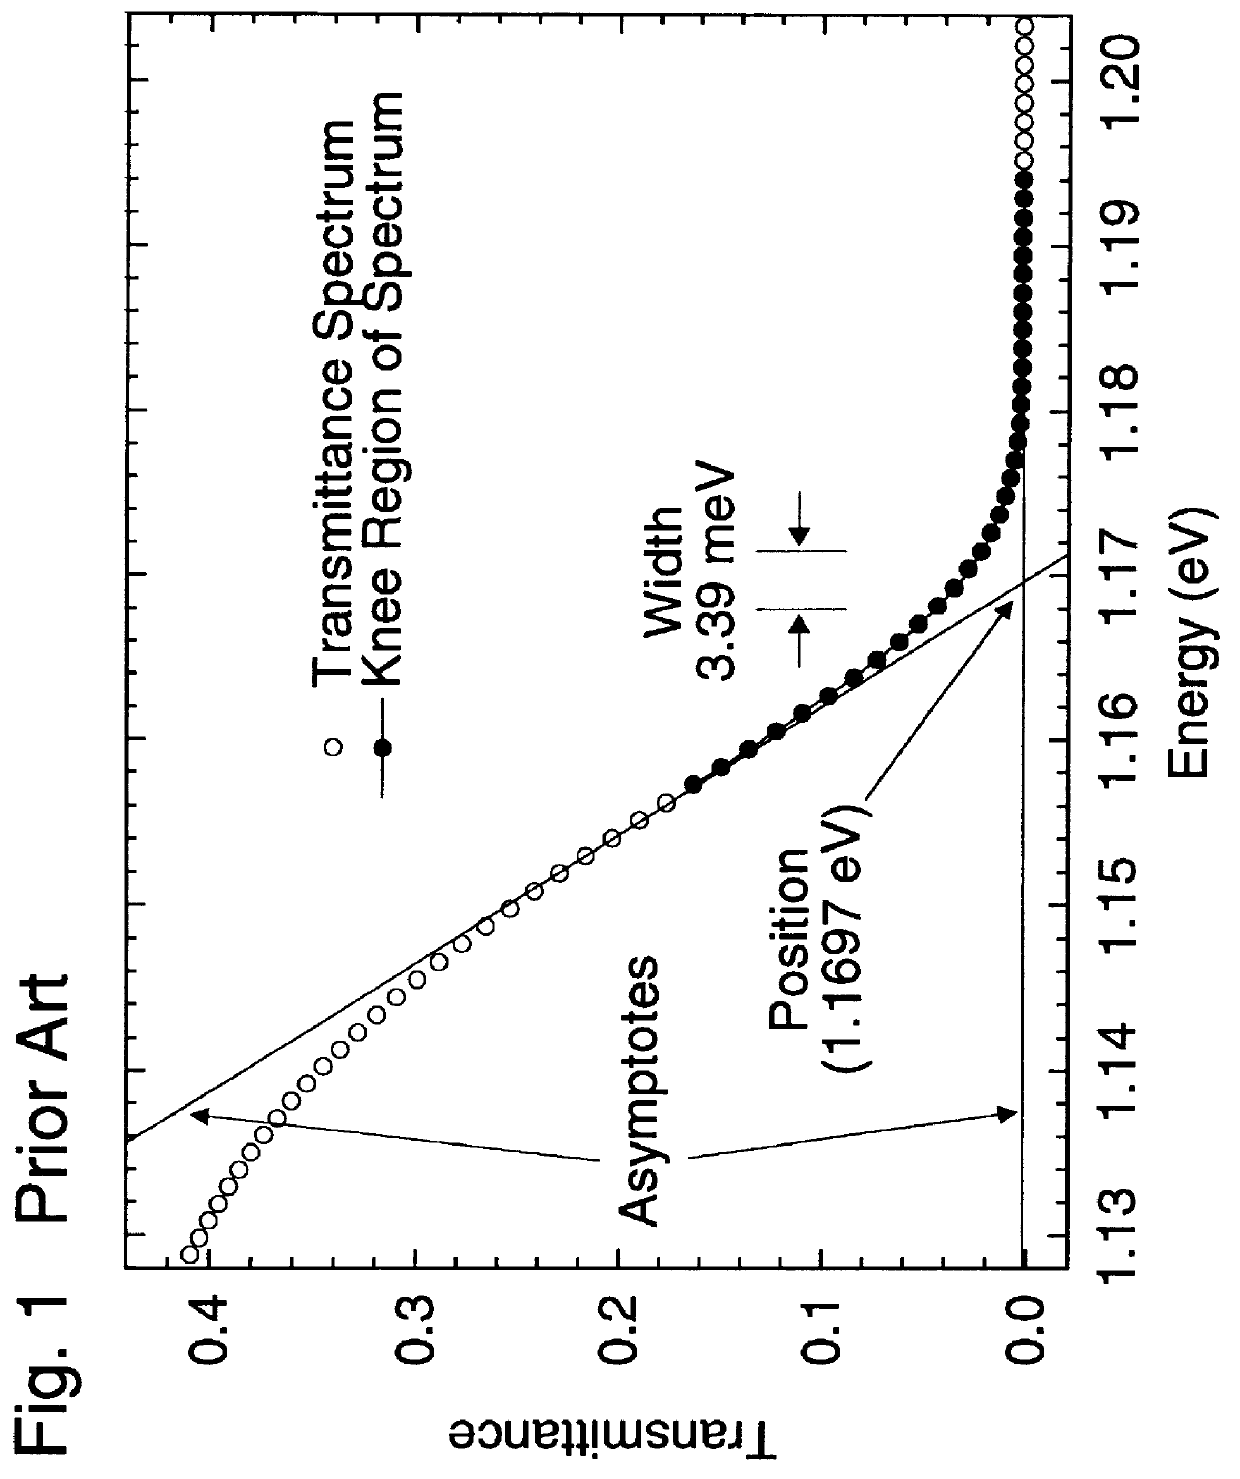 Method for determining the temperature of semiconductor substrates from bandgap spectra